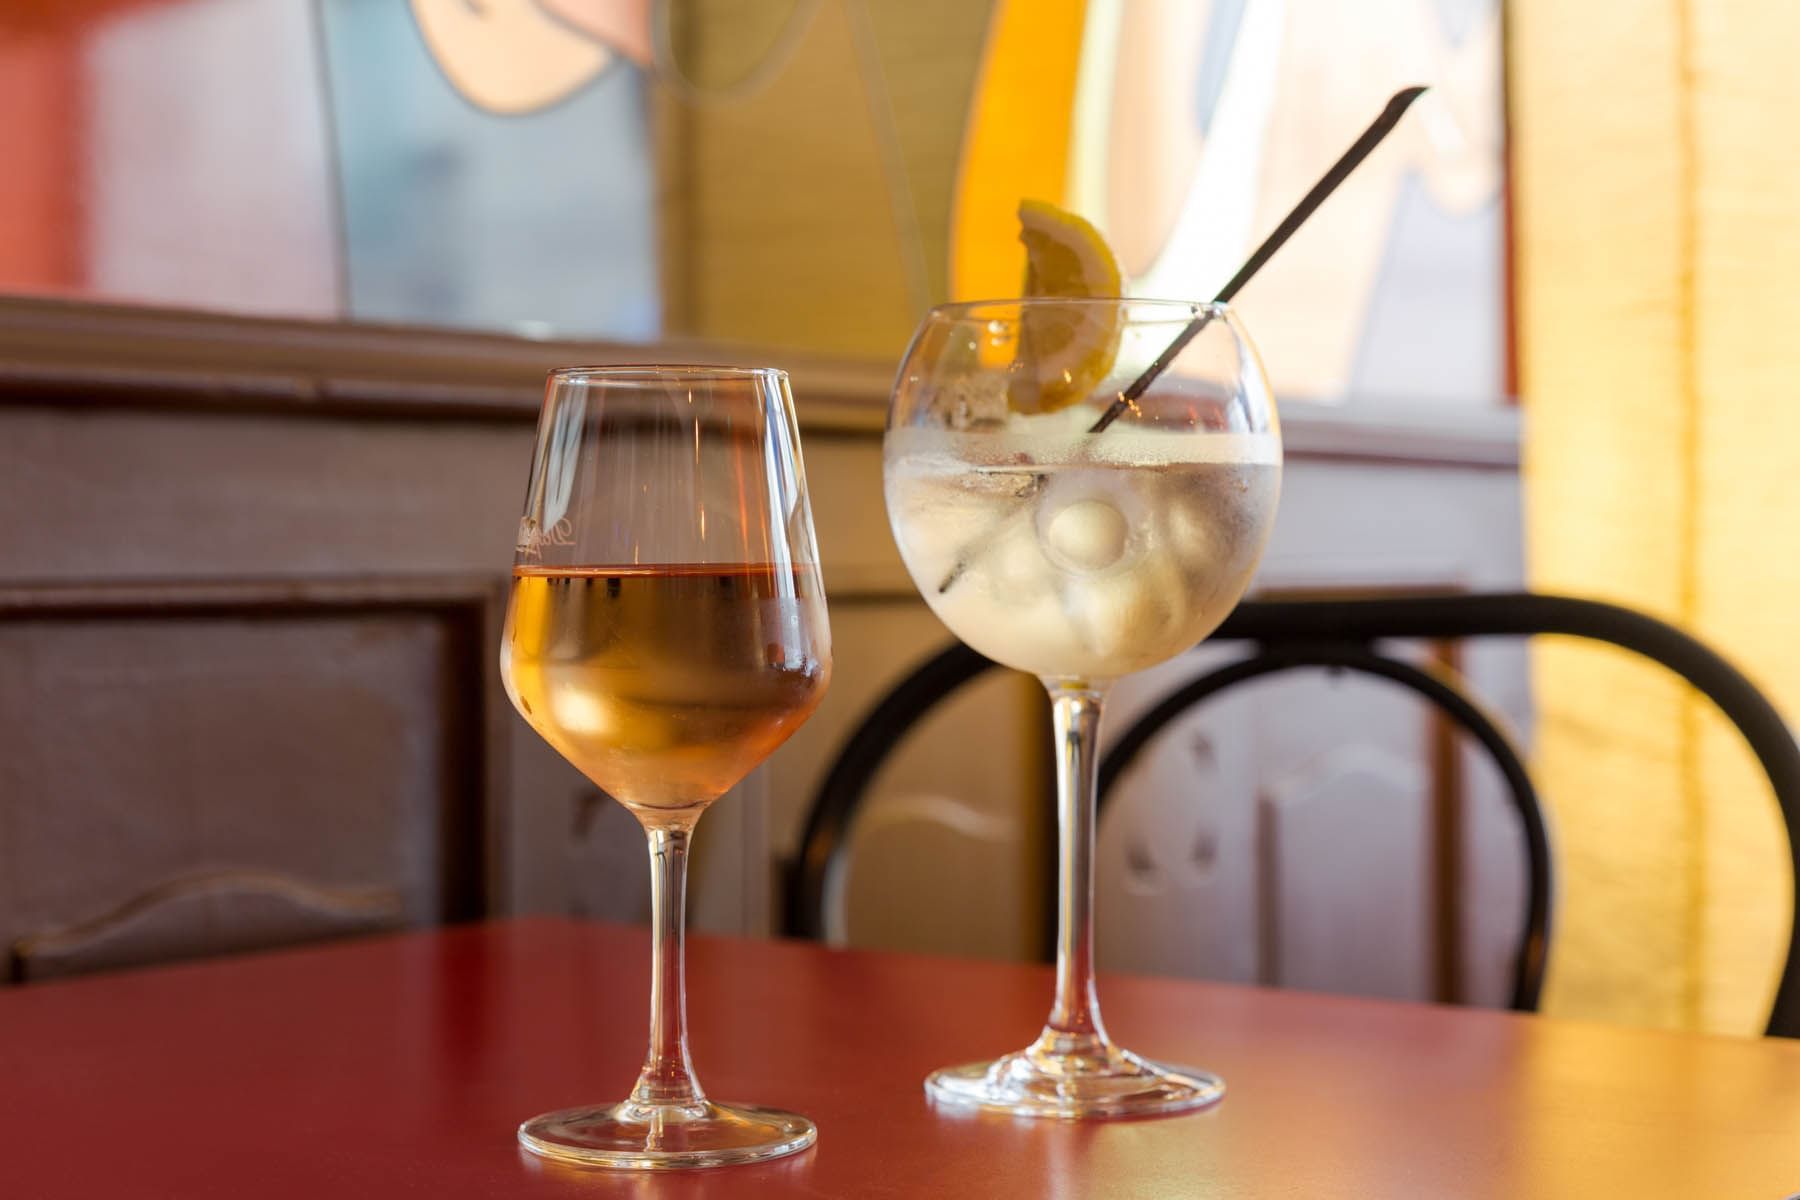 A glass of wine and a cold beverage served at the restaurant